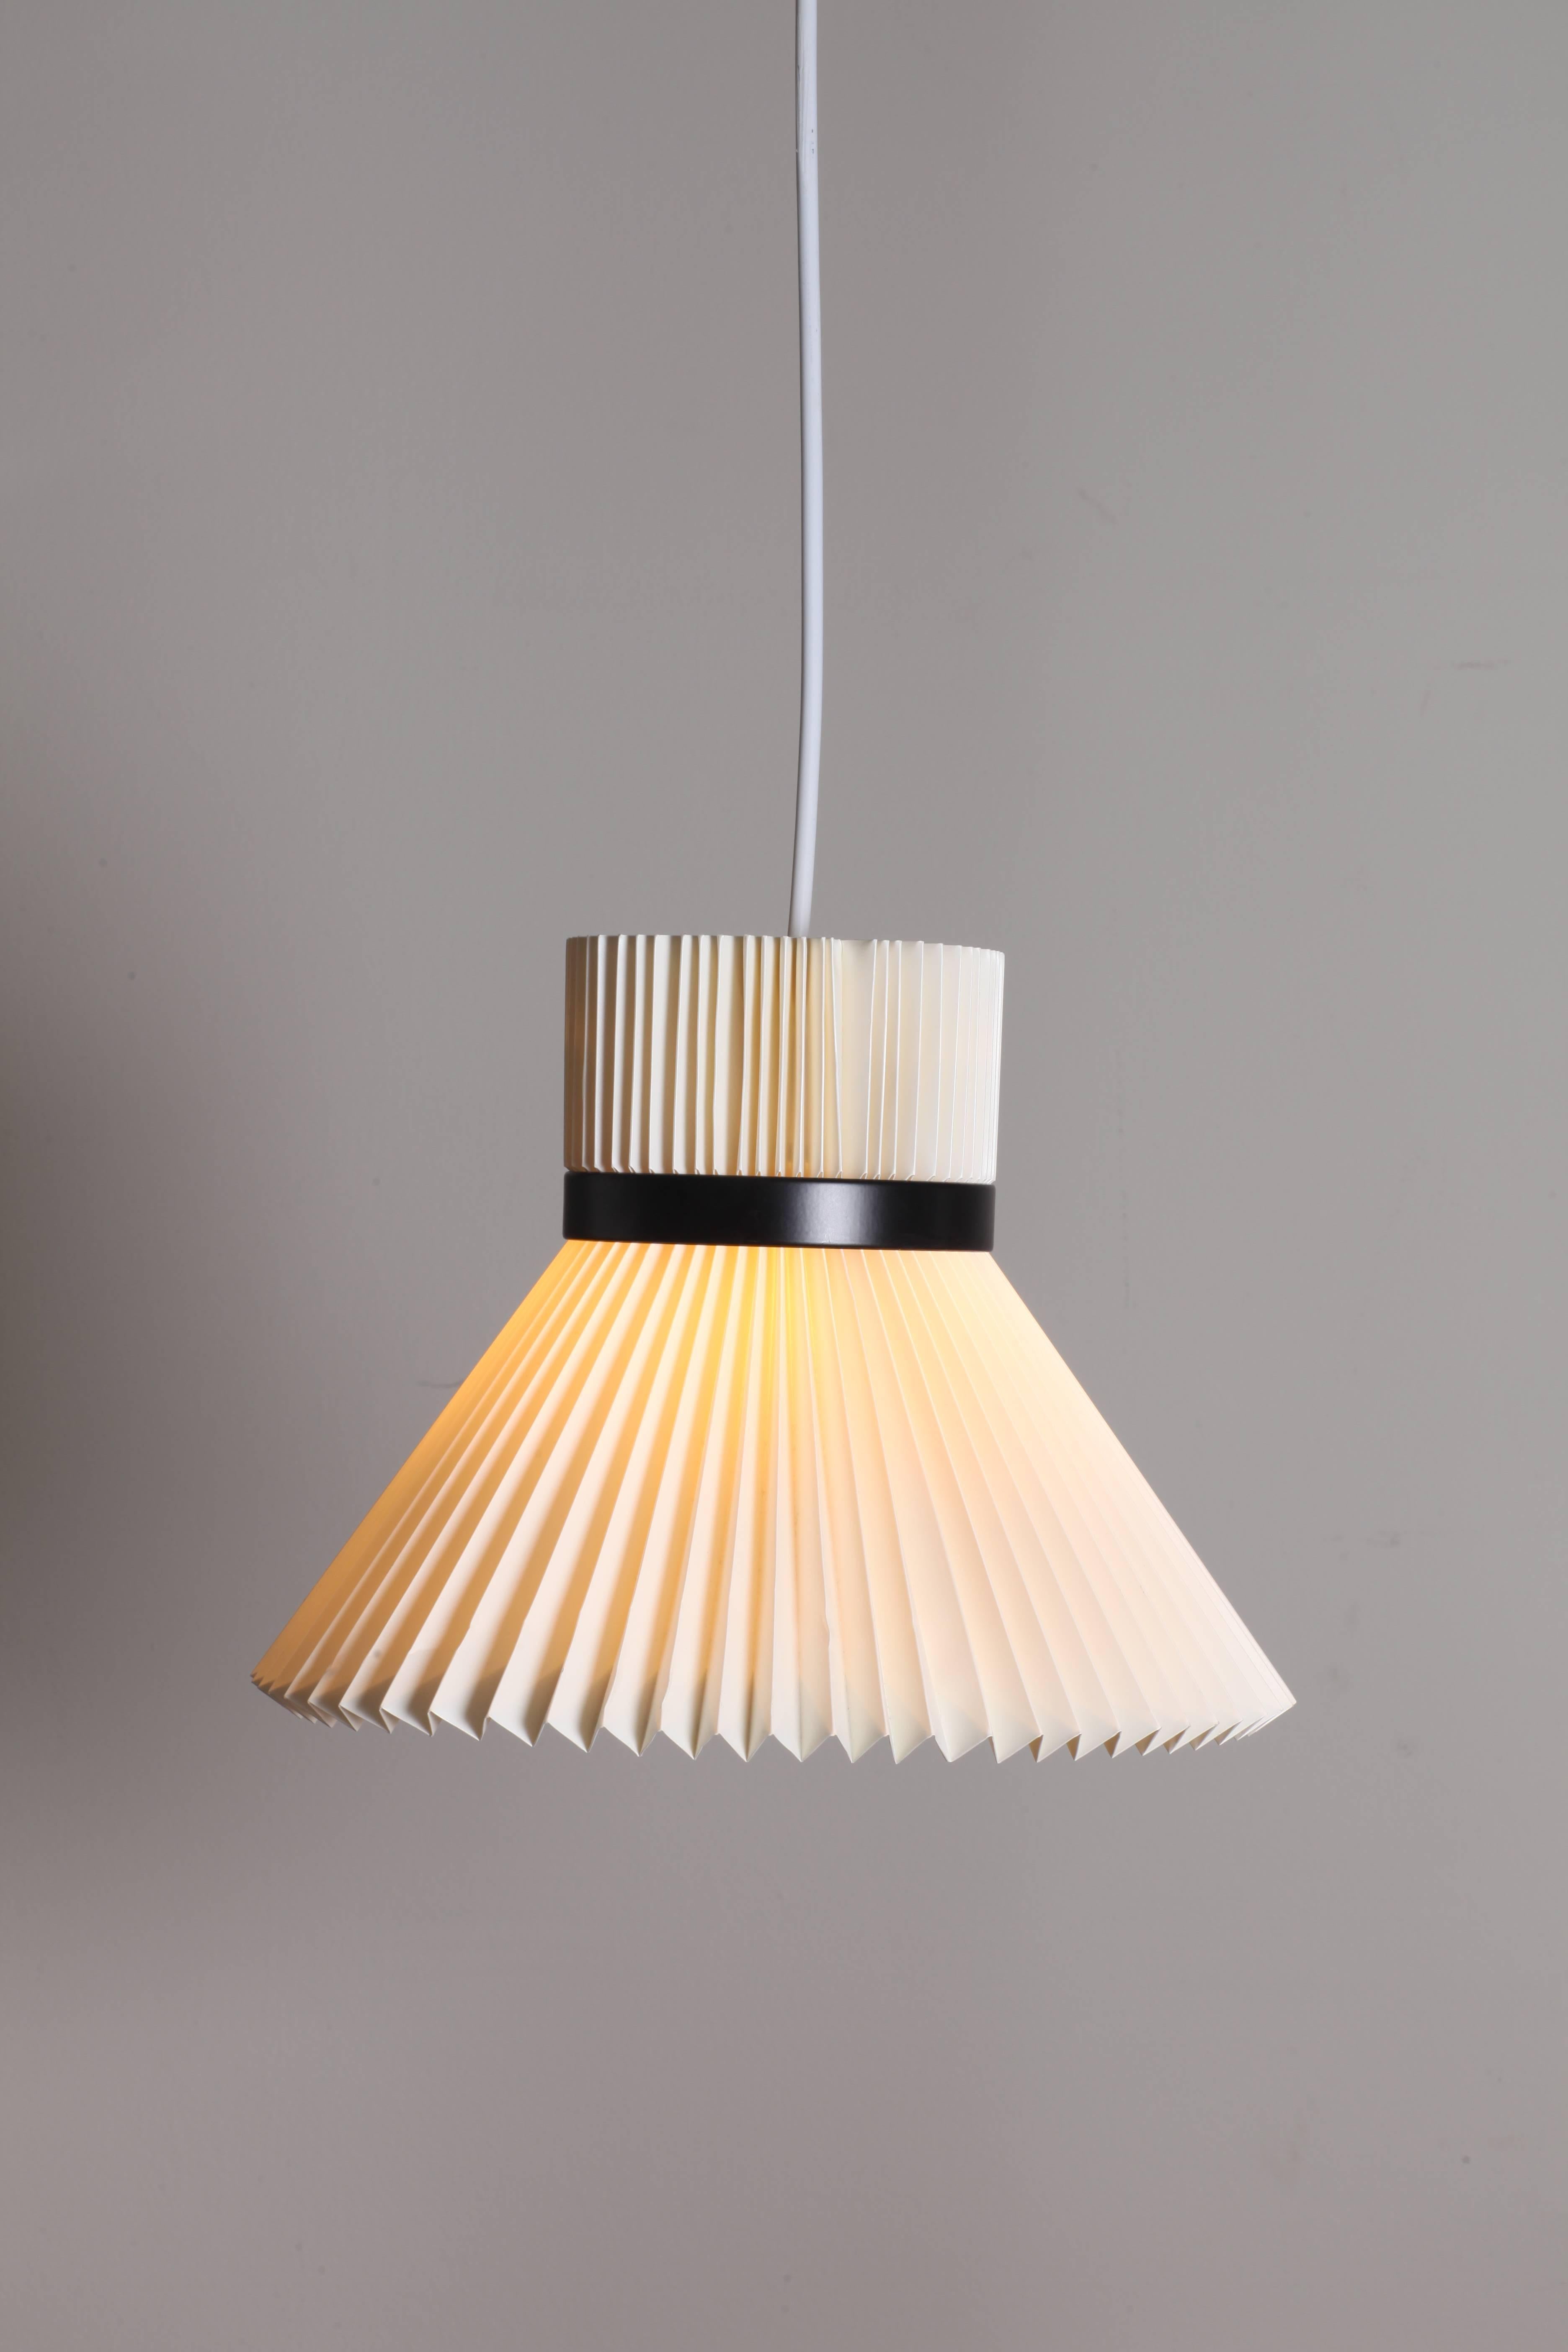 Scandinavian Modern Ceiling Lamp Le Klint In Good Condition For Sale In Warsaw, PL